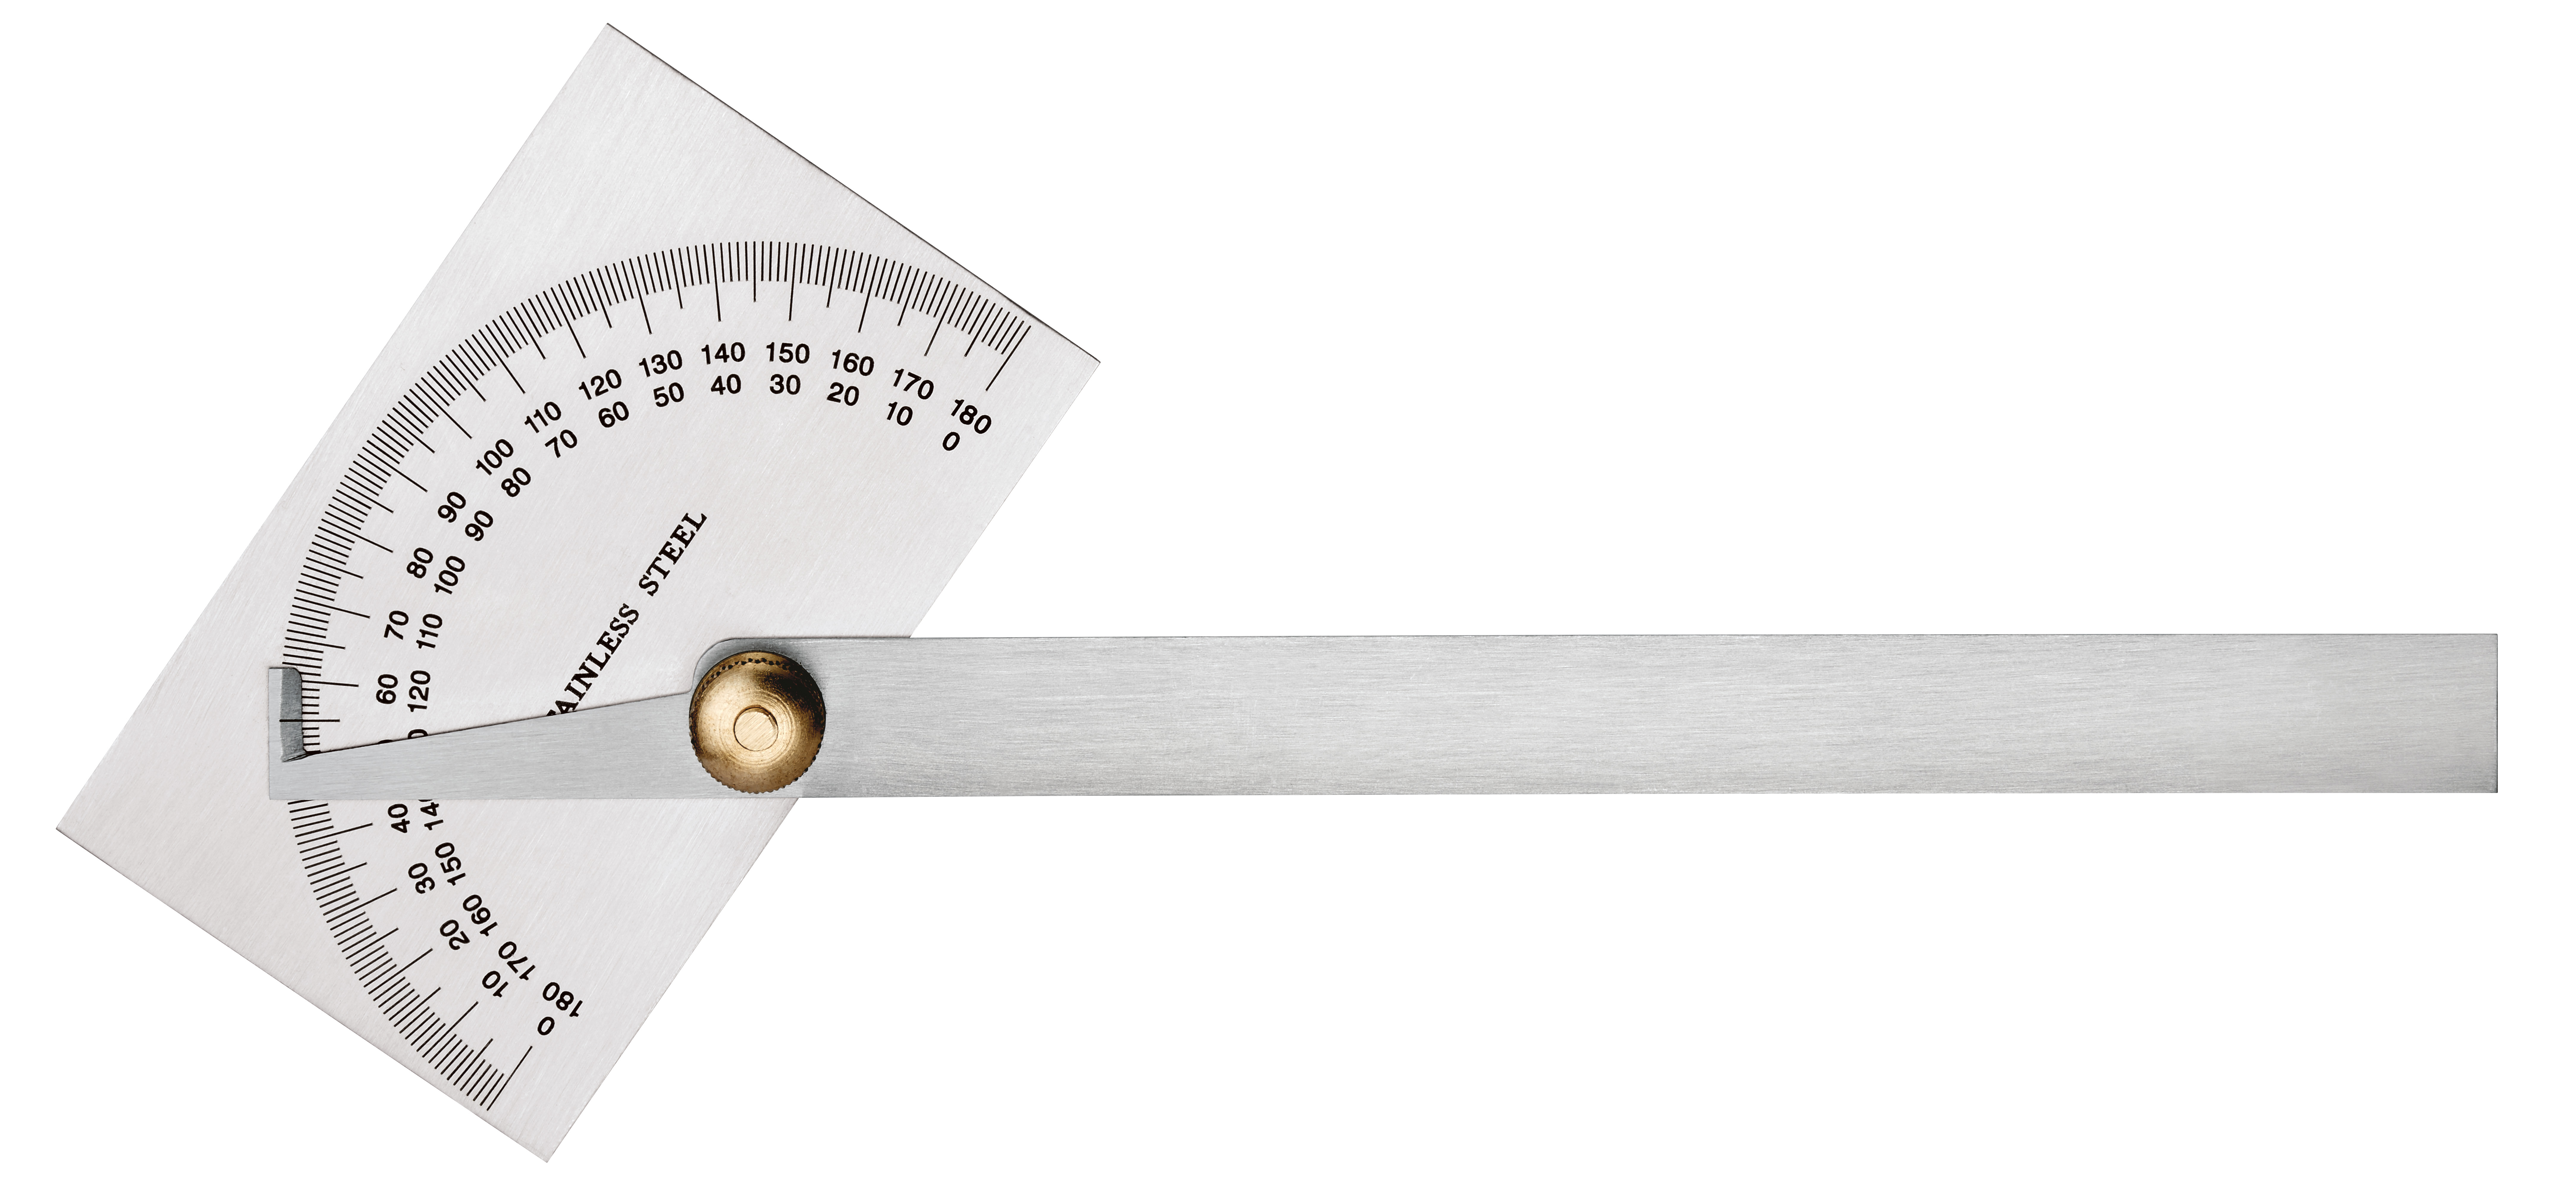 27912 046609279126 This stainless steel protractor is 6 in. long and has a square head. It measures from 0-180 degrees. Use this tool to measure and transfer angles.